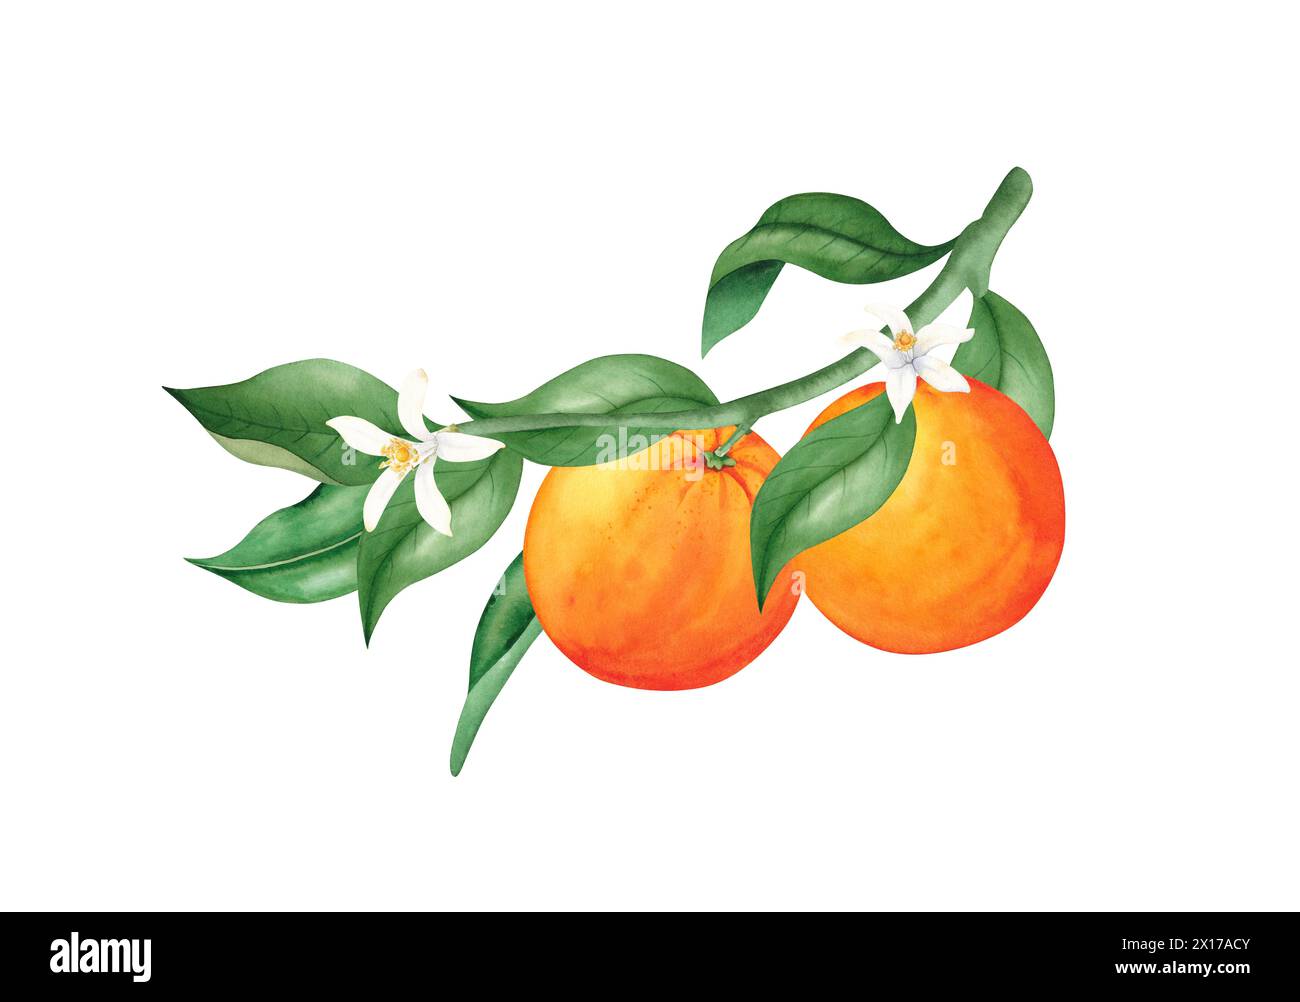 Orange branch with fruits, green leaves, flowers. Watercolor illustration isolated on white background. Perfect for wedding invitation, cards, print. Stock Photo